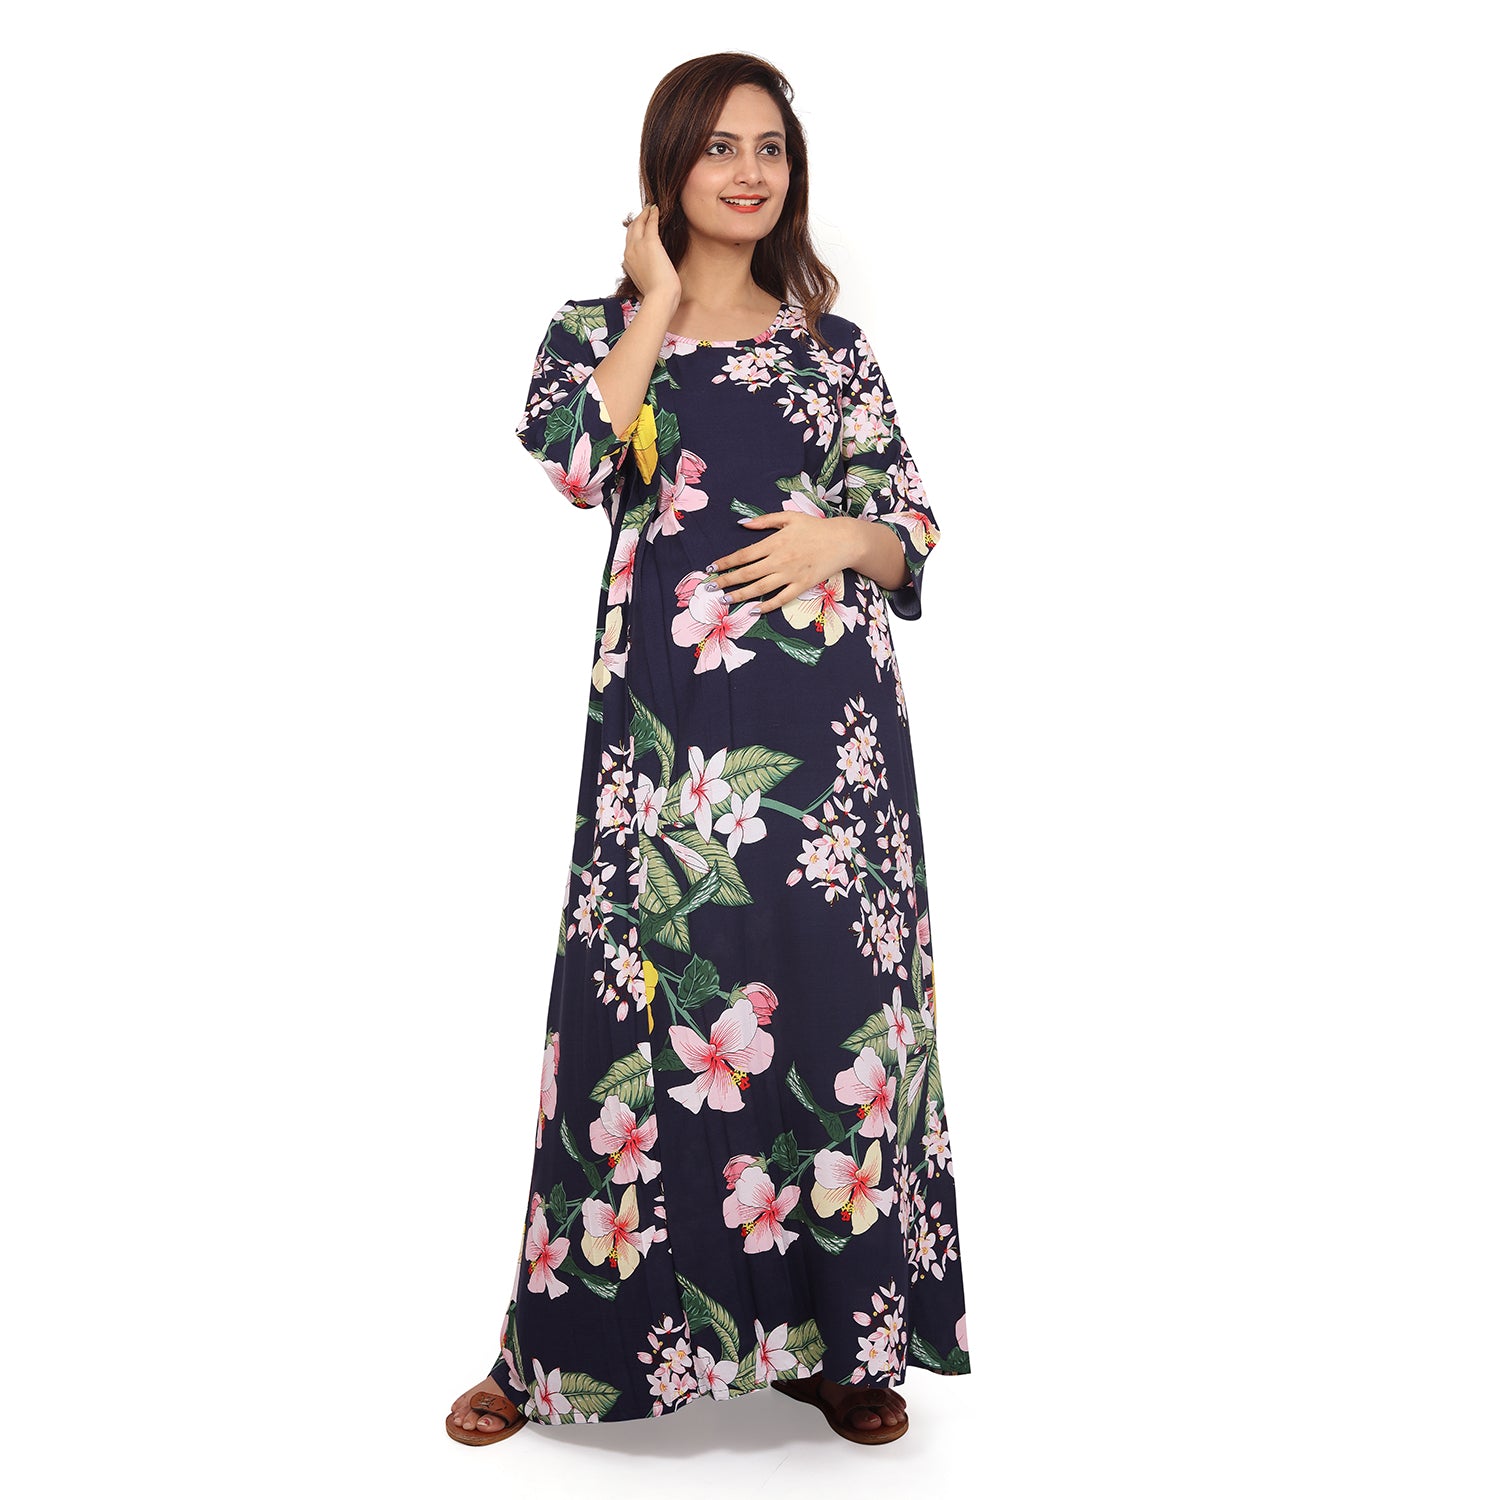 Baby Moo Full Length Comfortable Nursing And Maternity Dress Floral Lily - Blue